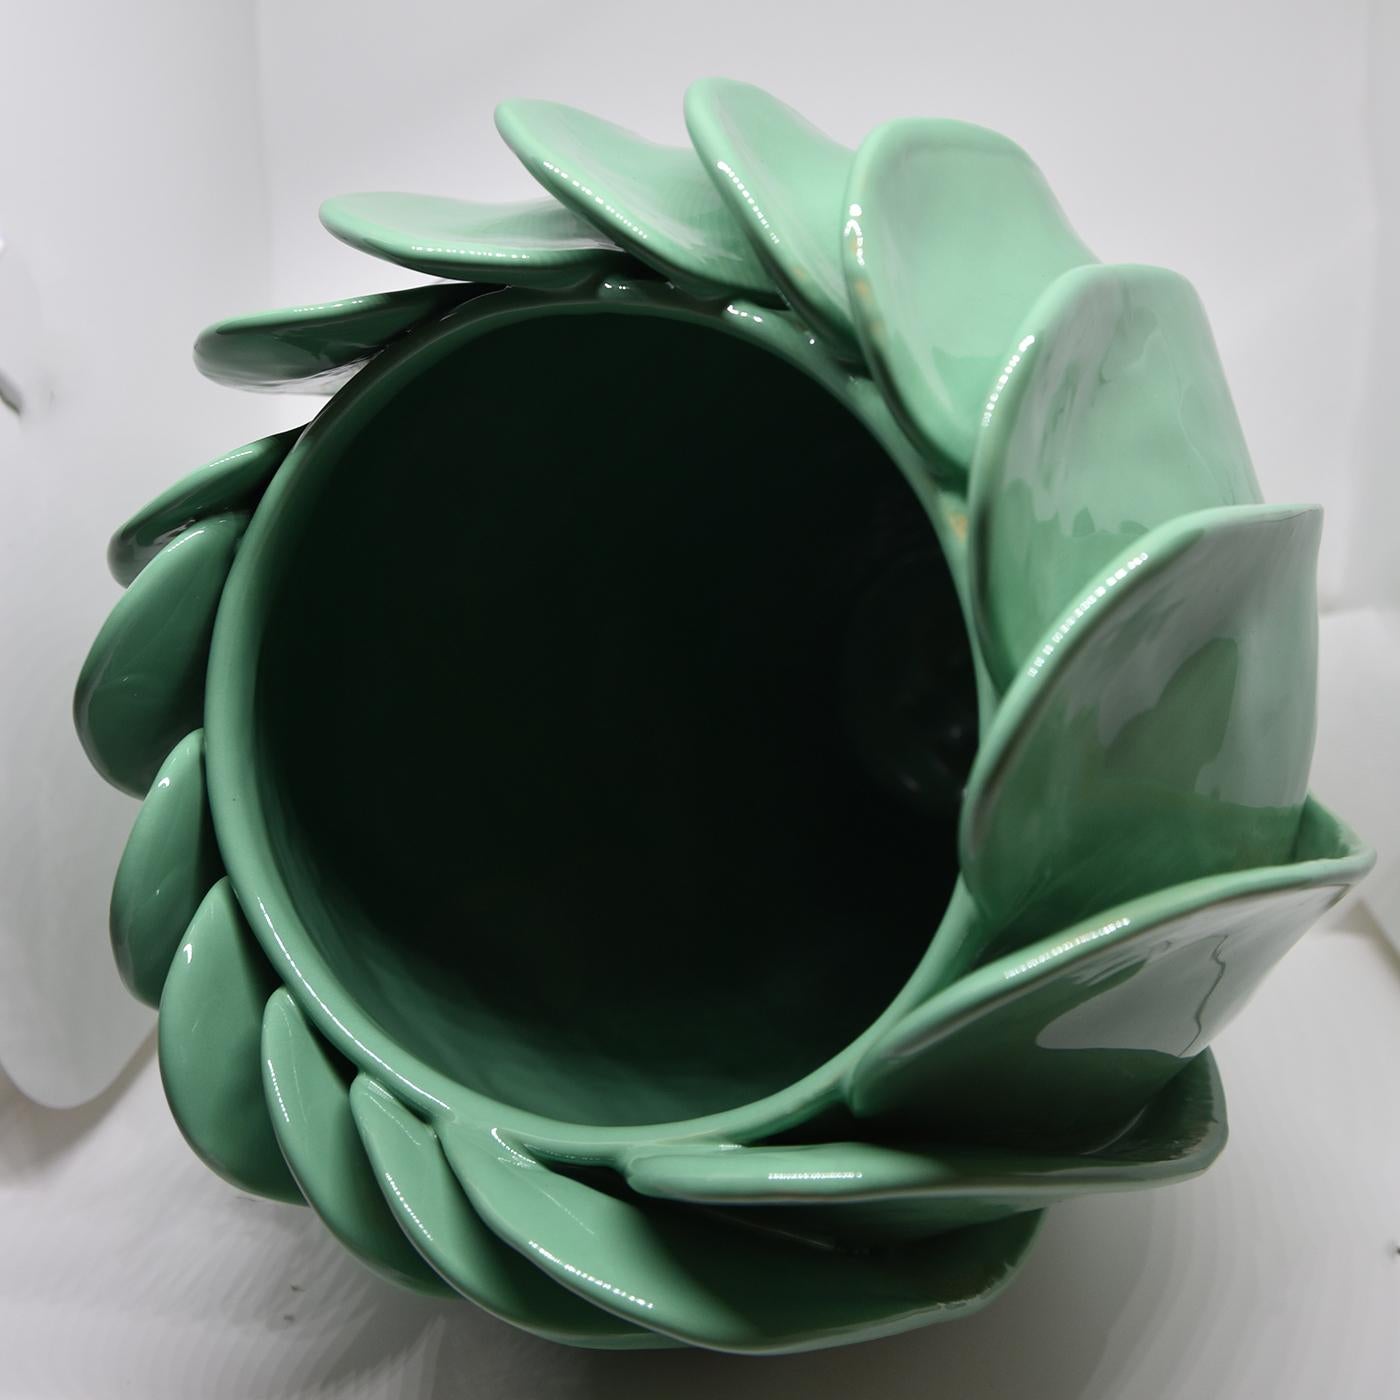 This remarkable vase is part of a limited series of numbered pieces all signed by the artist. This piece features a glossy aqua-green glaze and a truly captivating shape resembling the petals of a flower that is about to bloom. Because it is made by